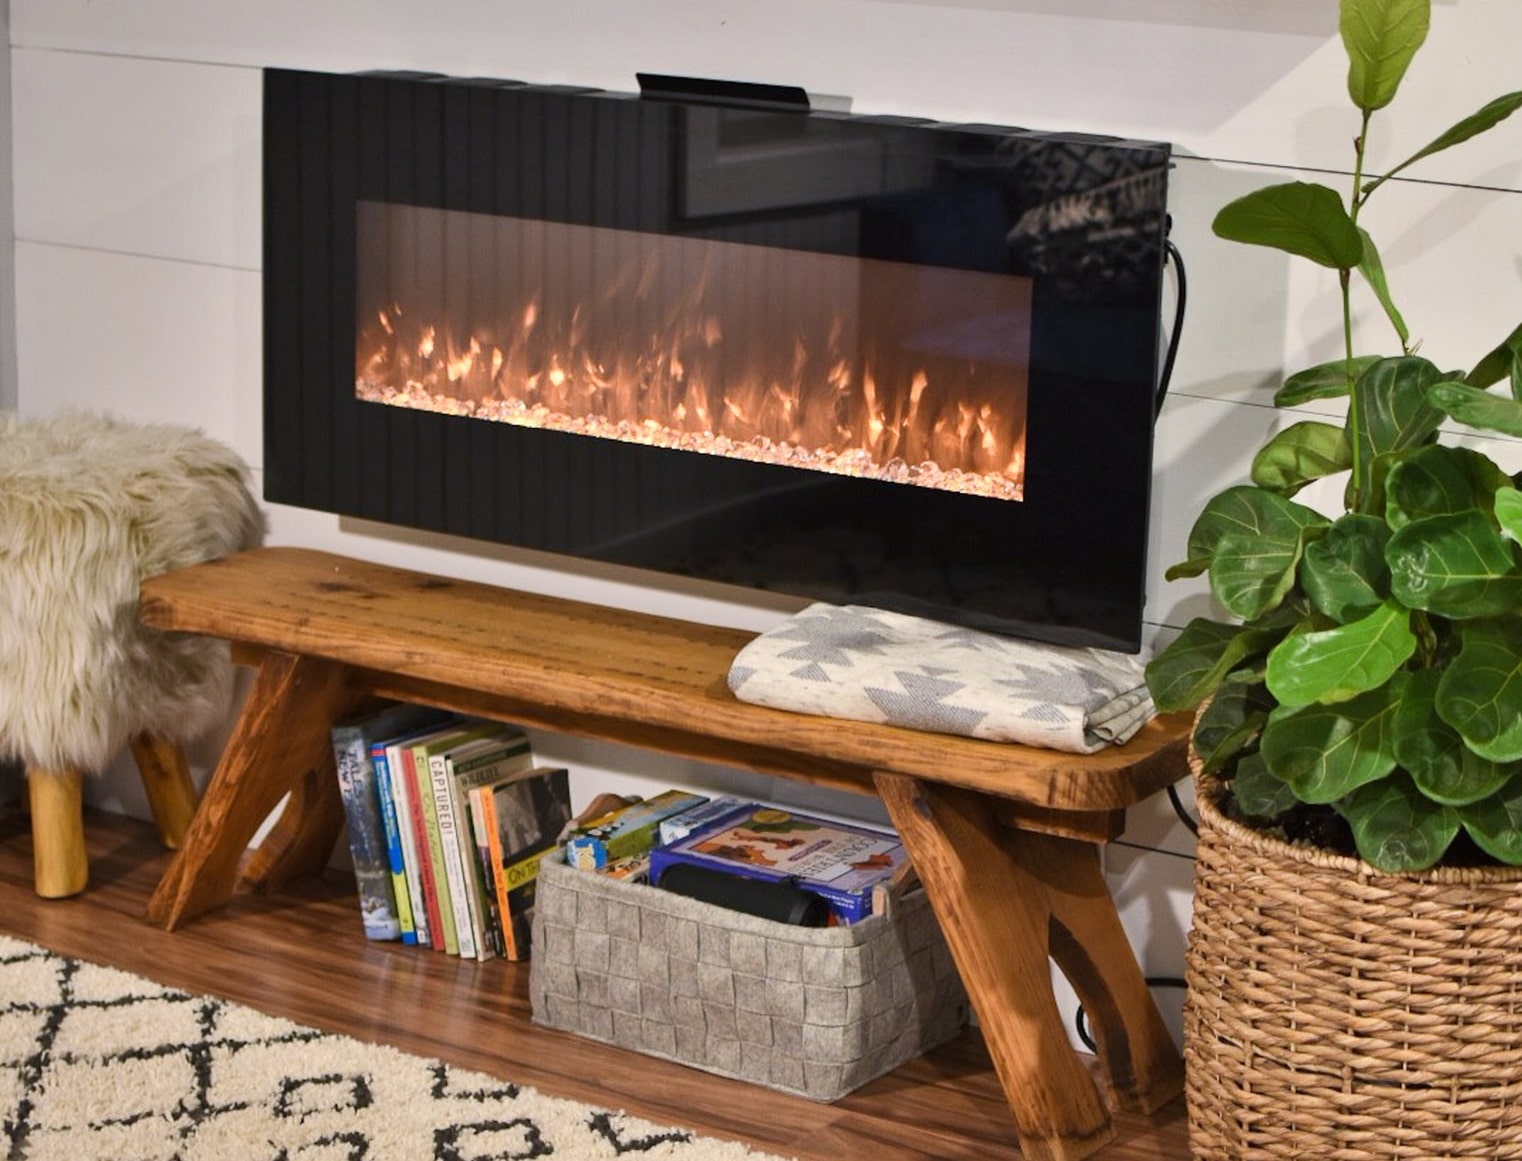 Factors Affecting Electricity Consumption of an Electric Fireplace